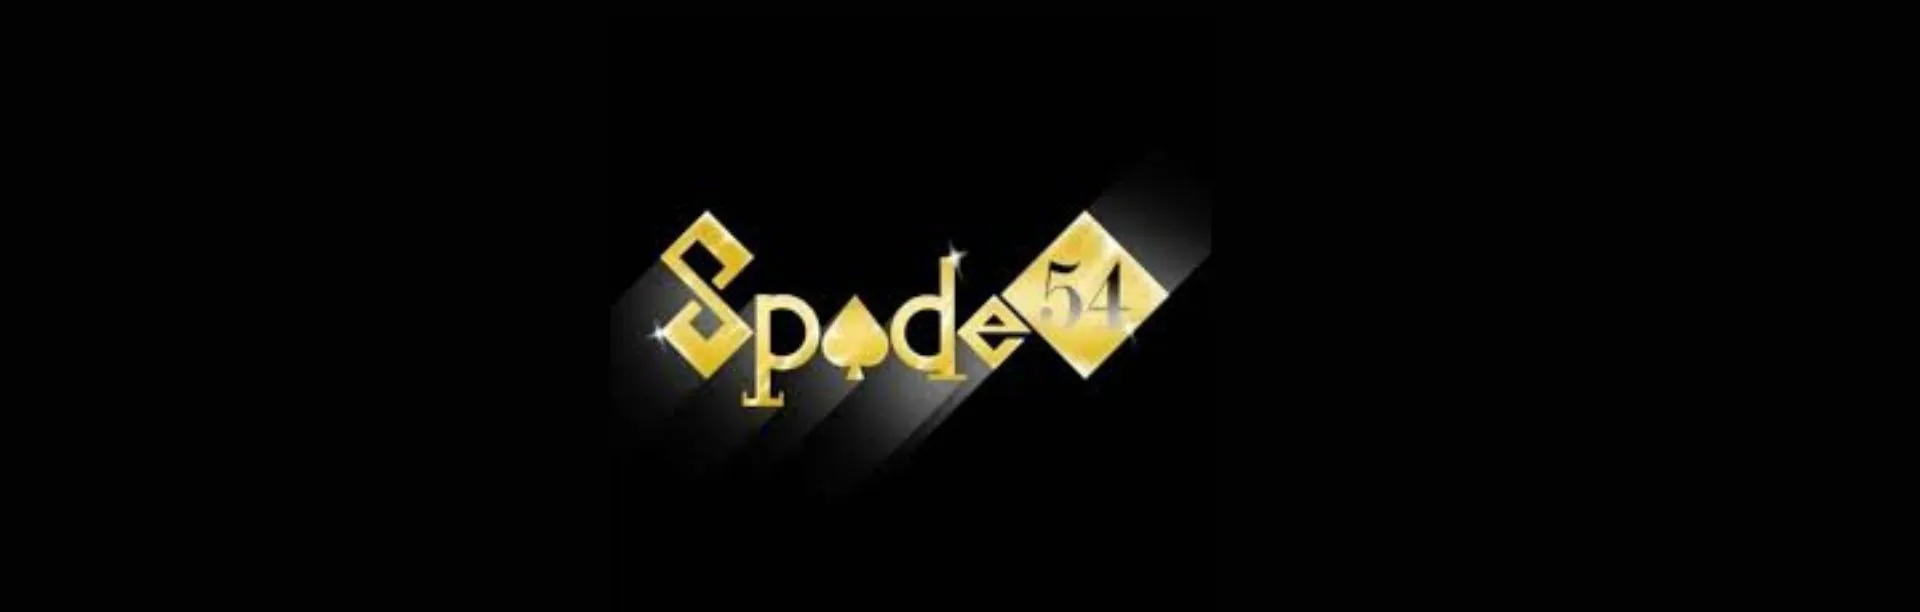 Spade54 Casino Review: Ultimate Gaming Experience